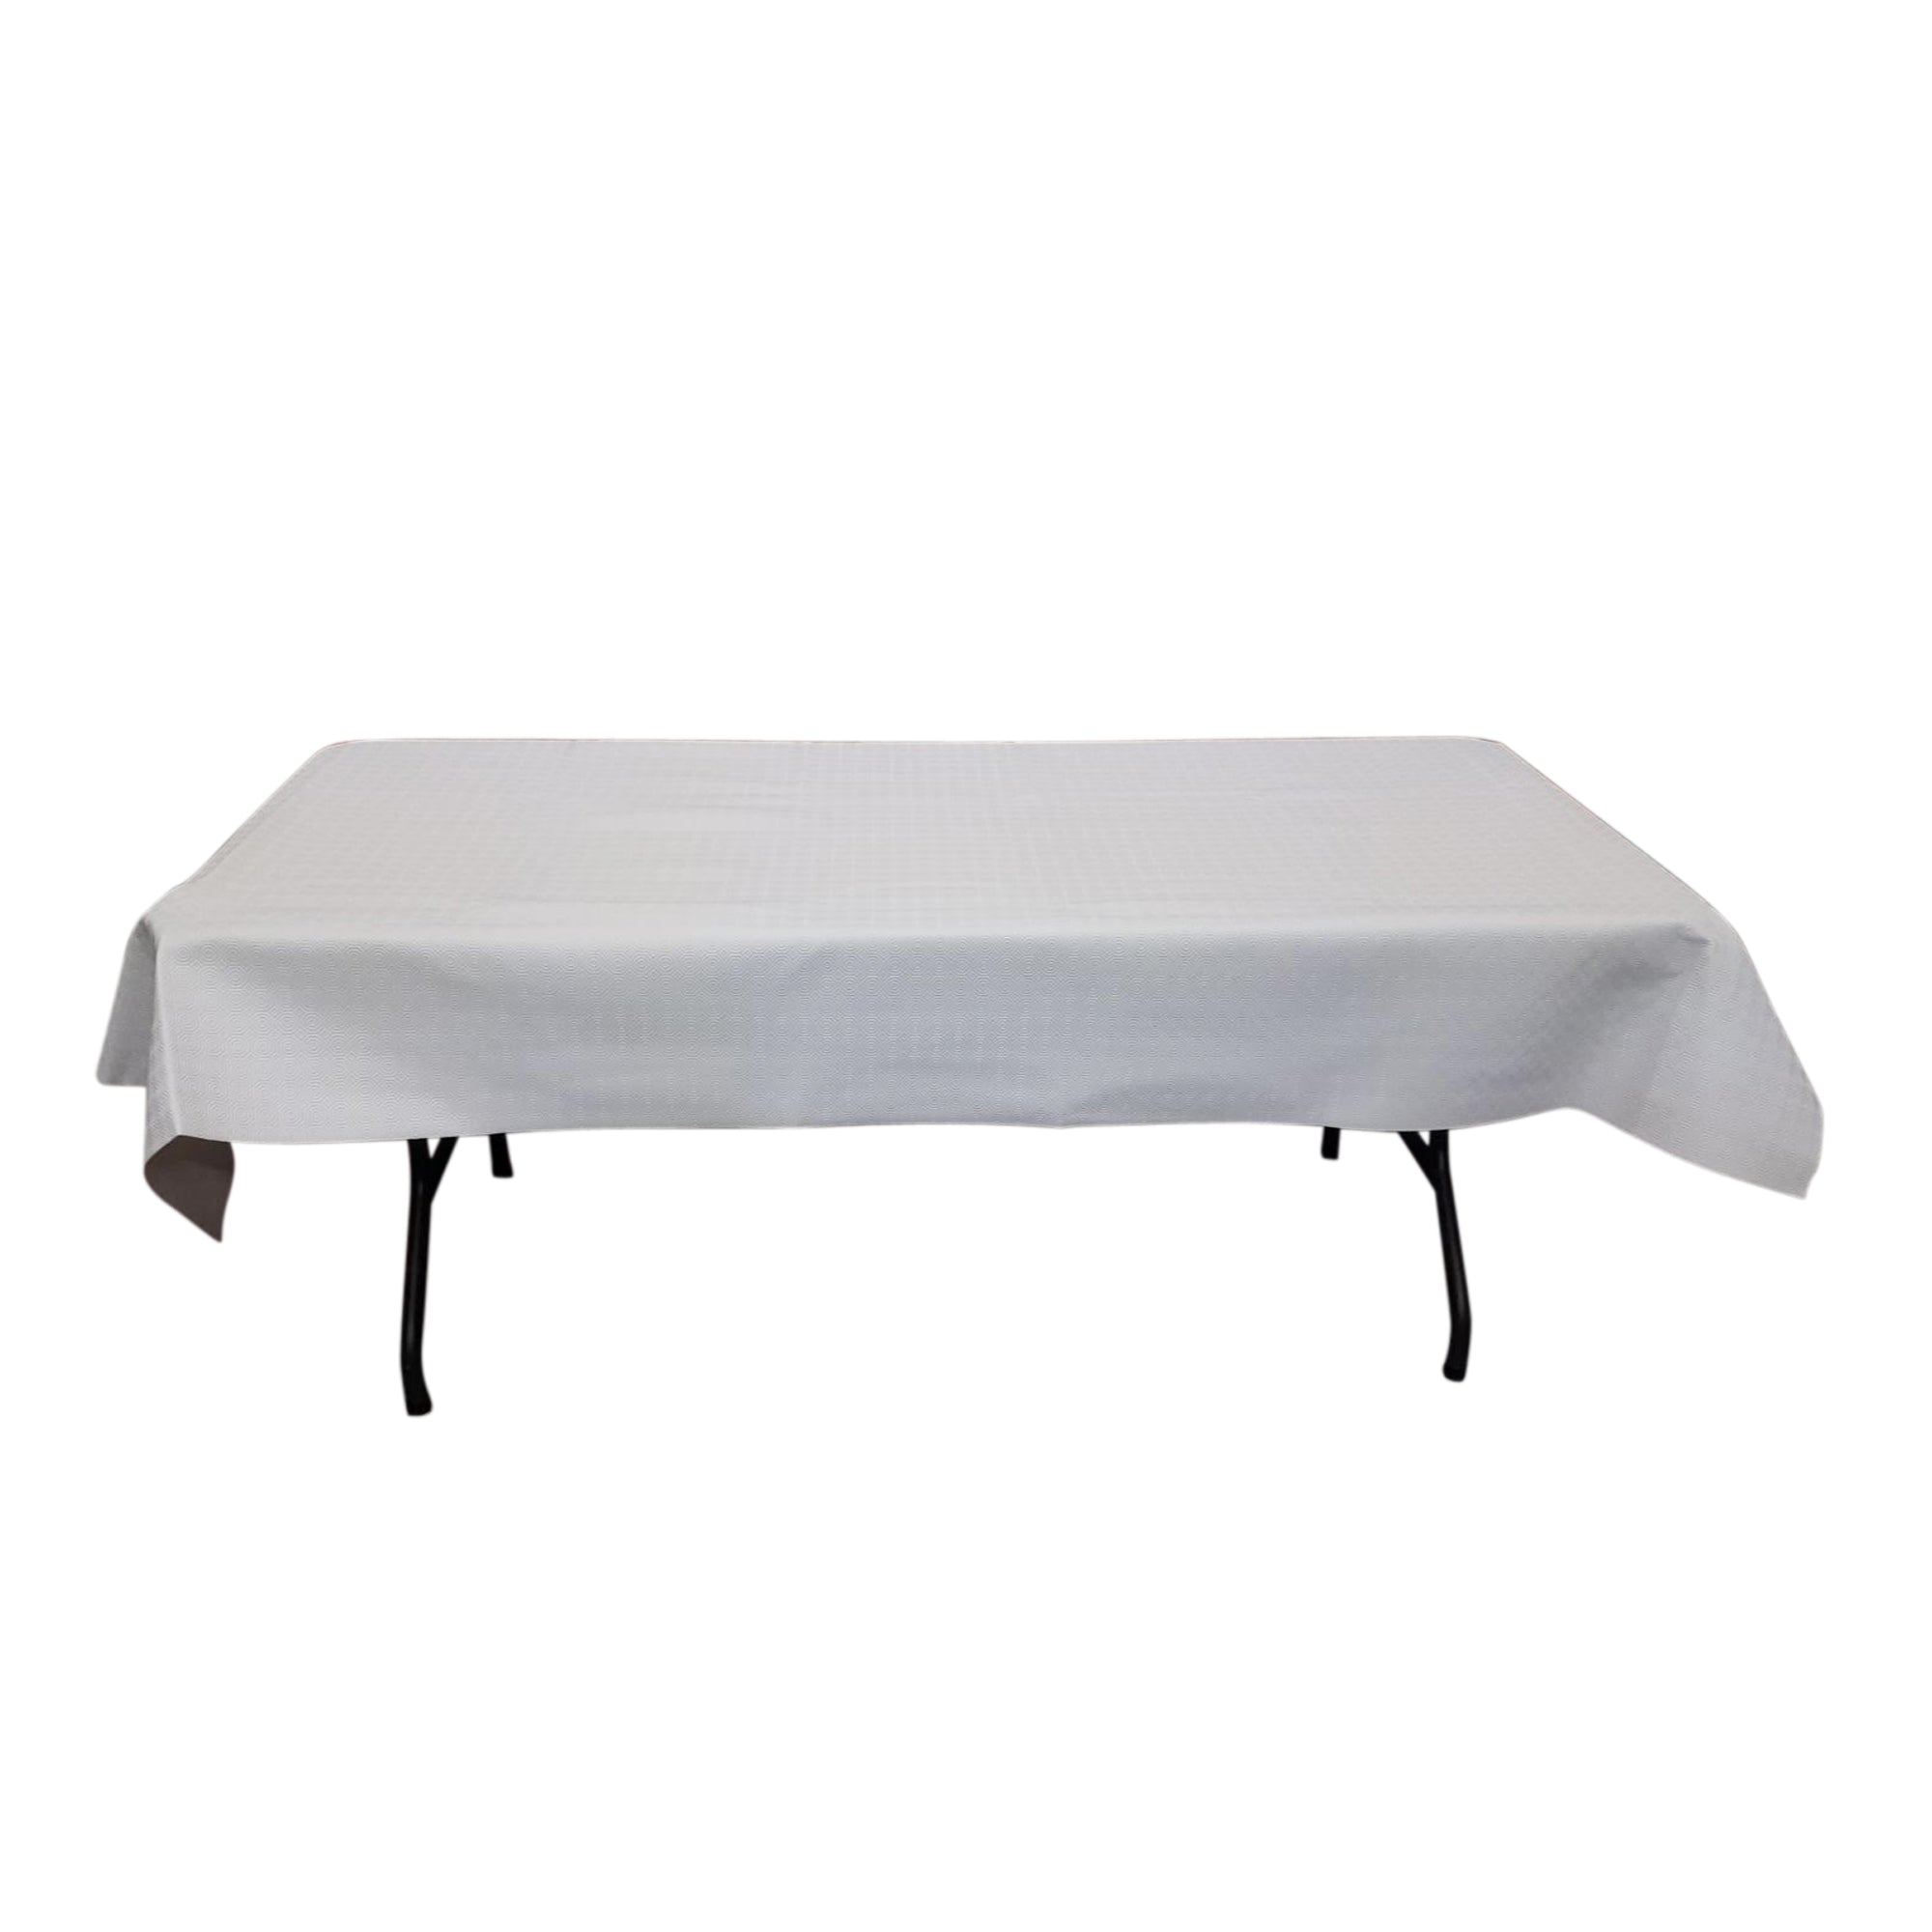 54'' x 90'' PVC table pad protector - Valley Tablecloths